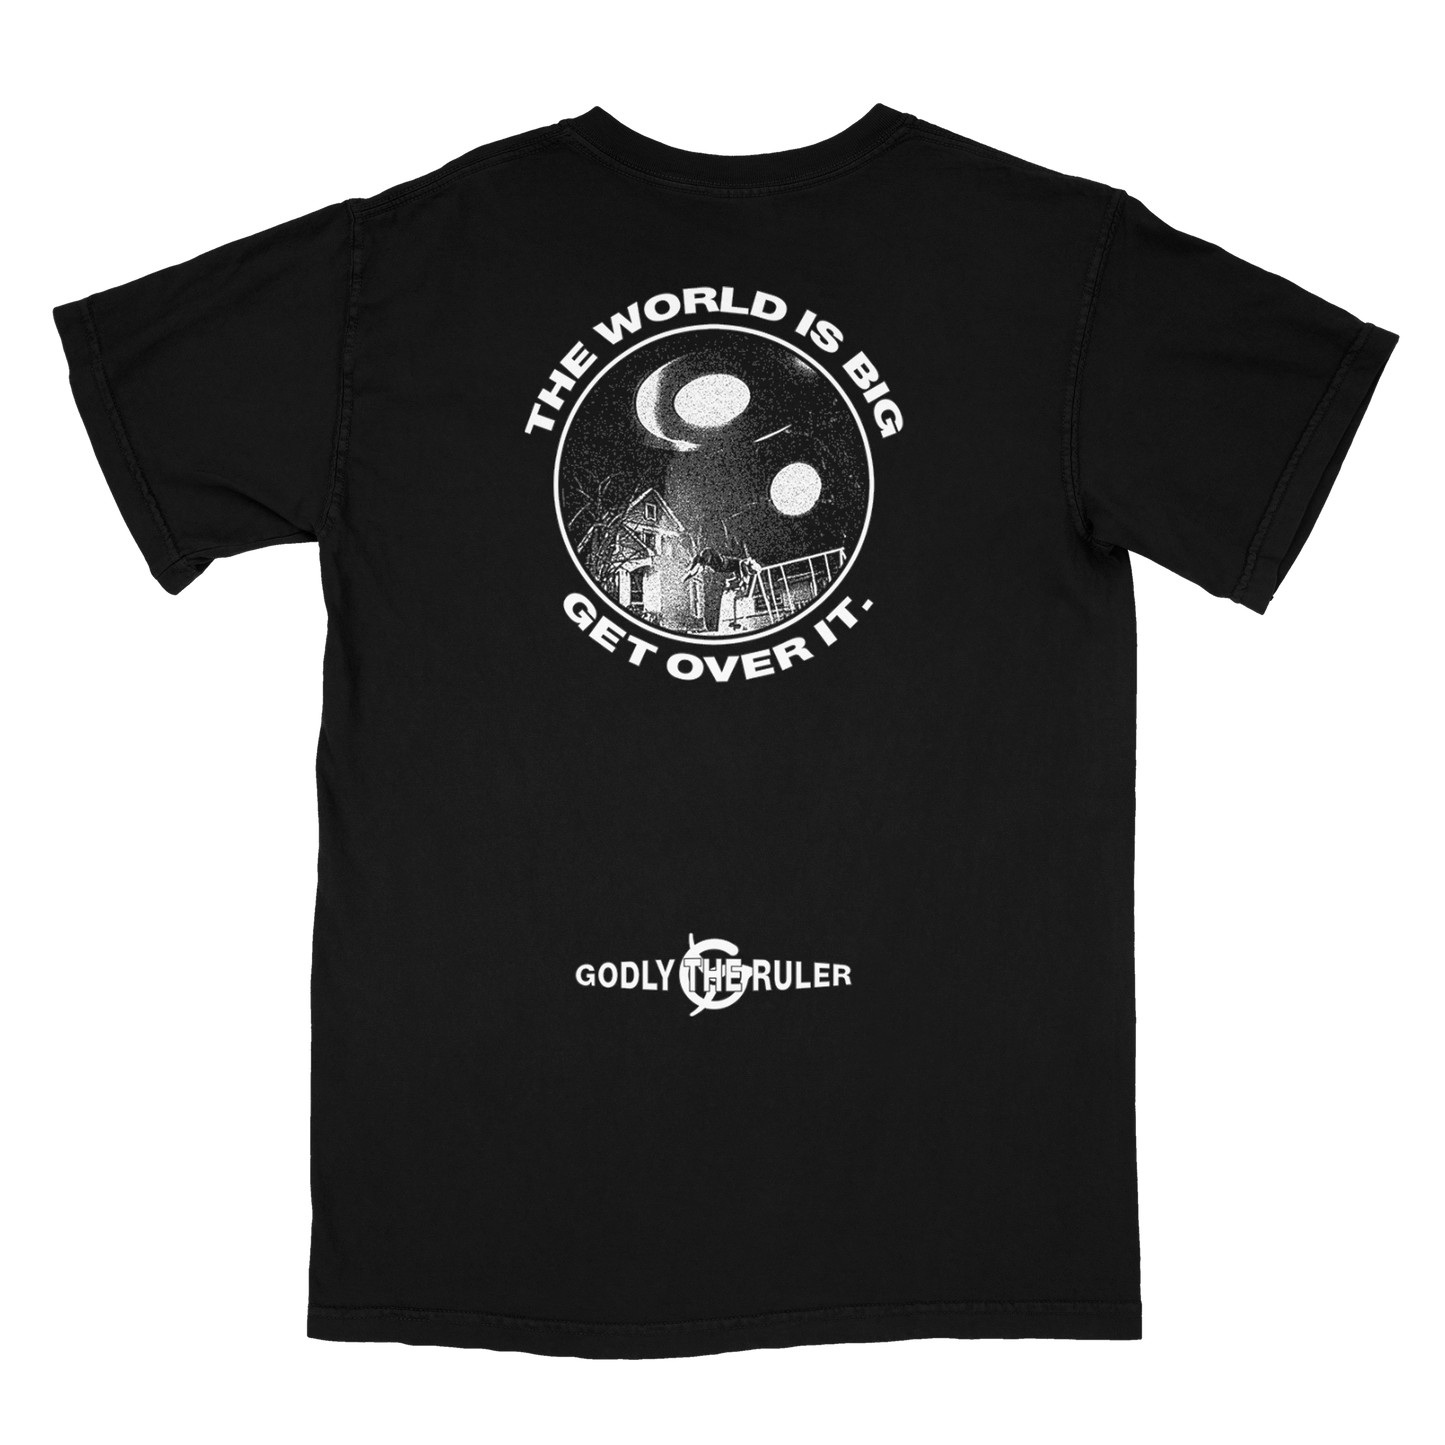 Godly the Ruler - the world is big, get over it (t-shirt)